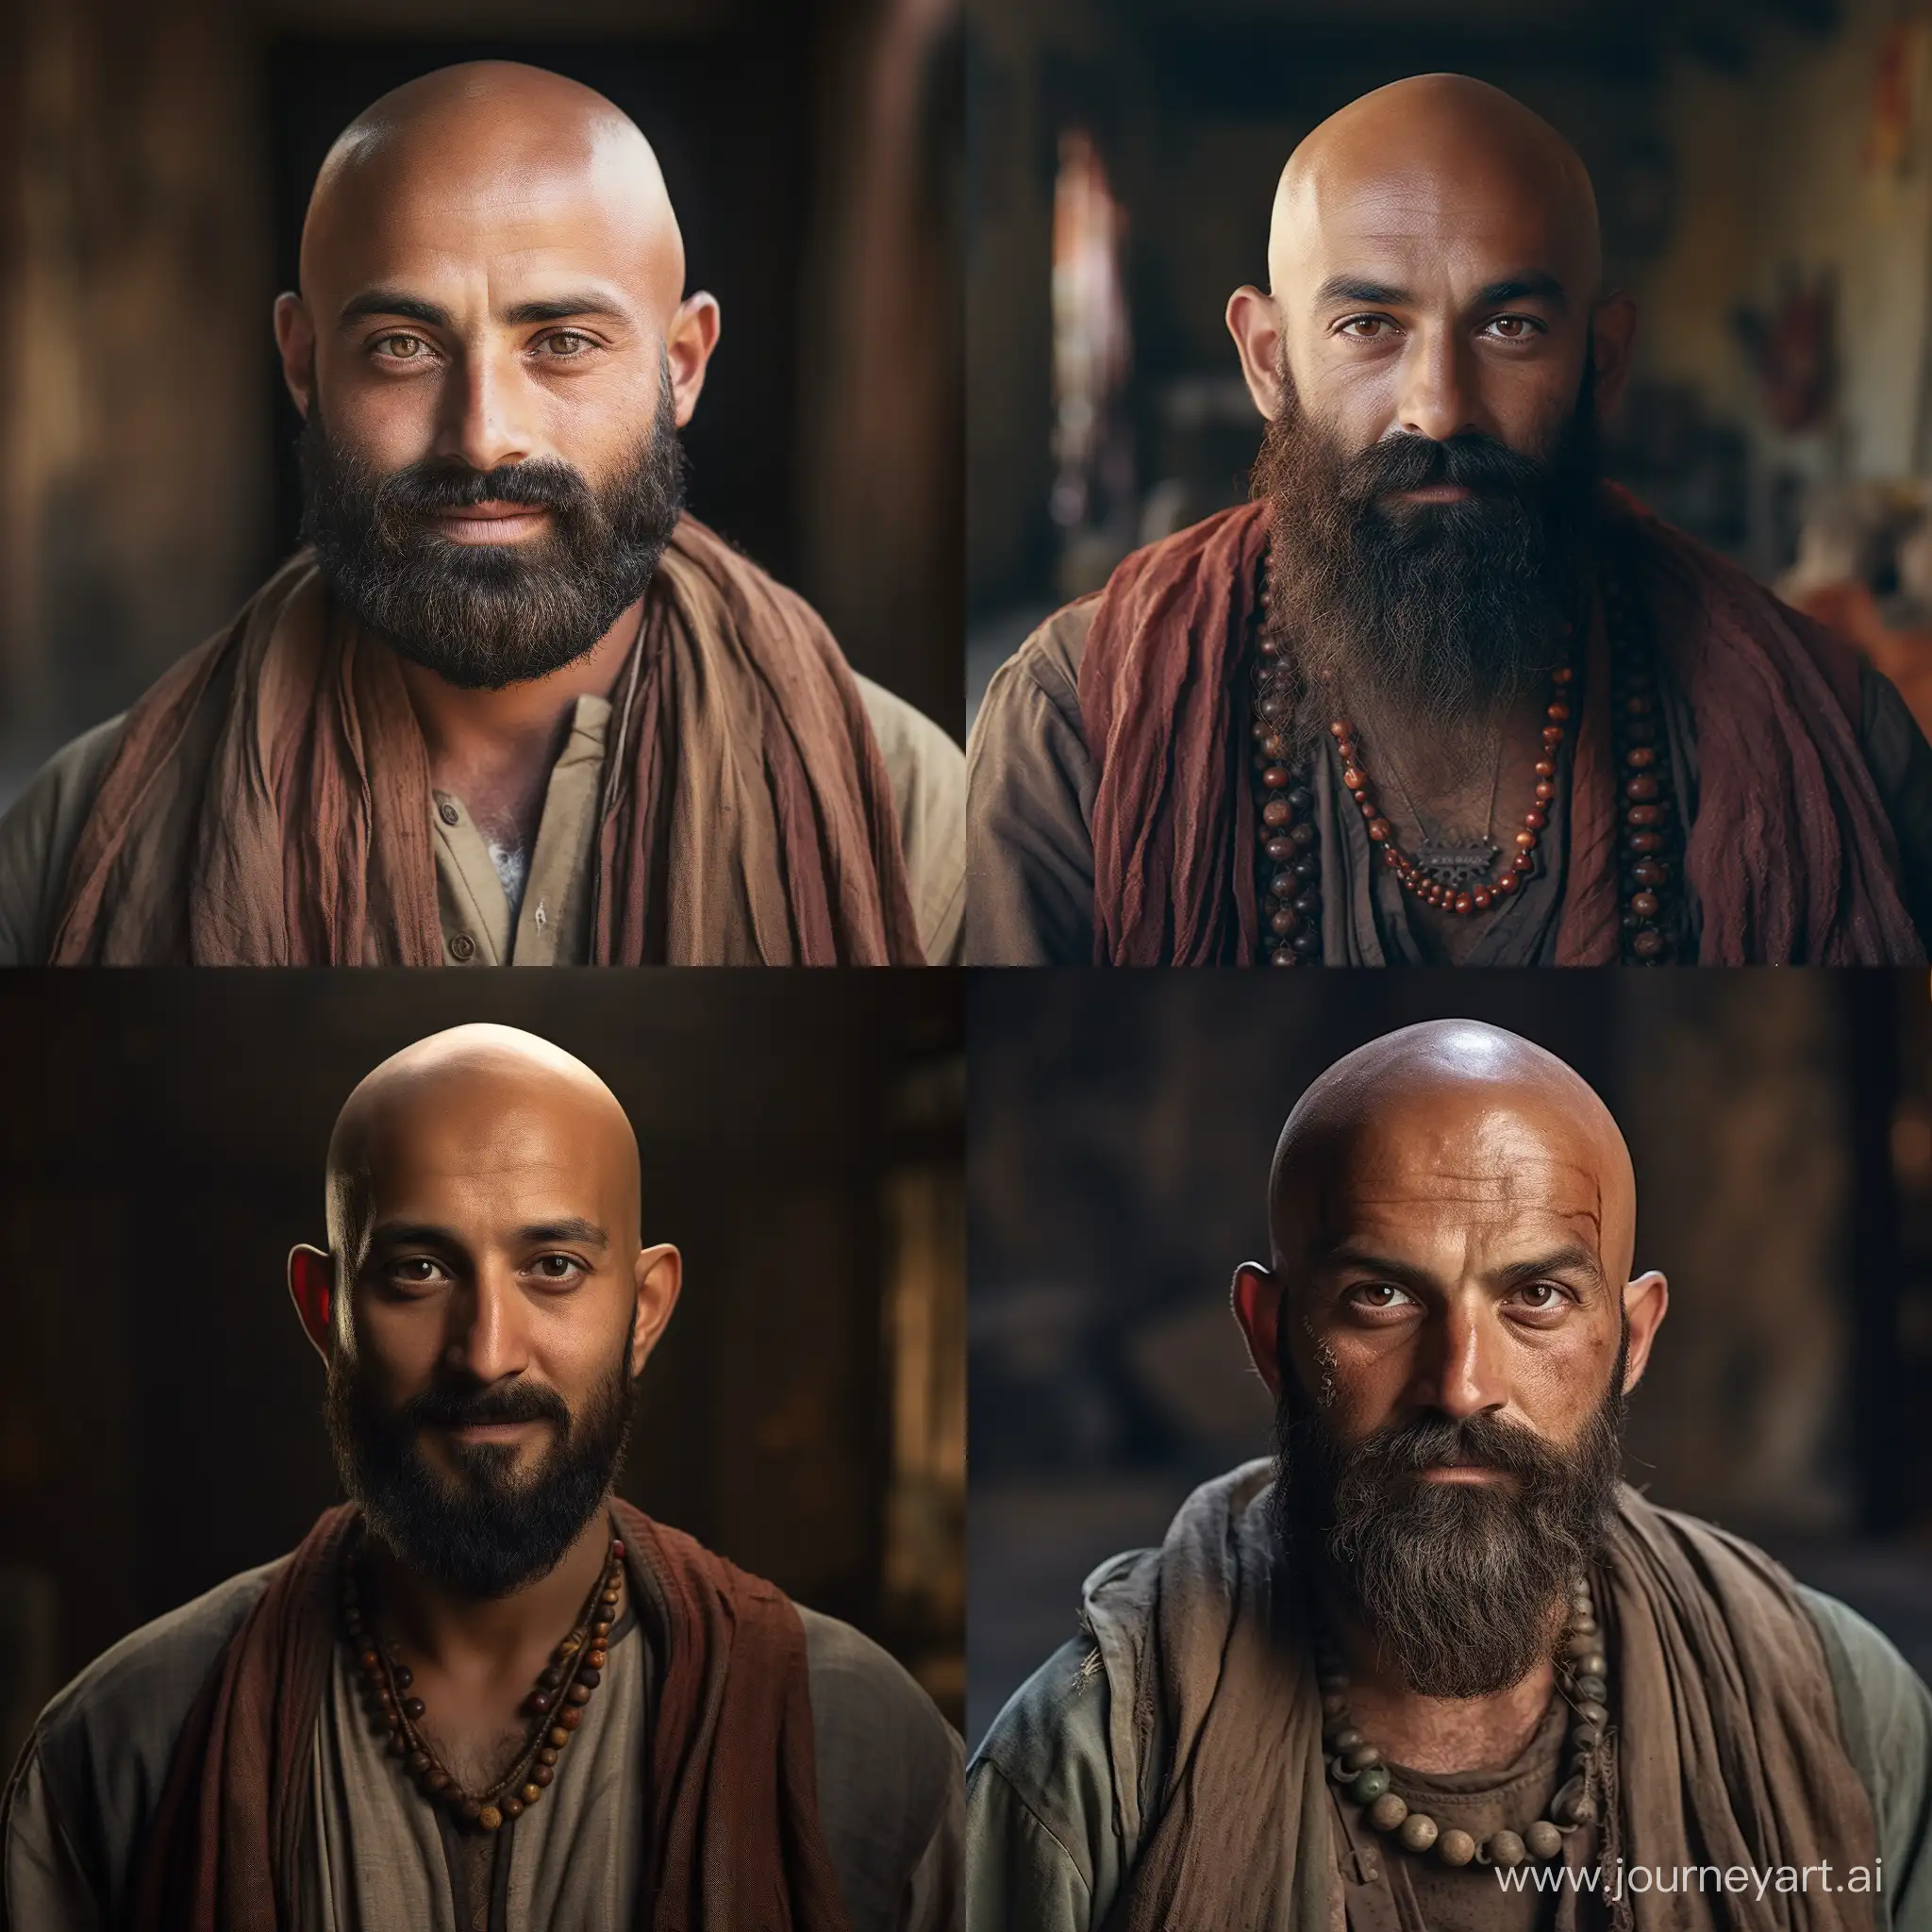 a bald bearded man from Nepal, who has hope to study in Australian university, cinematic style